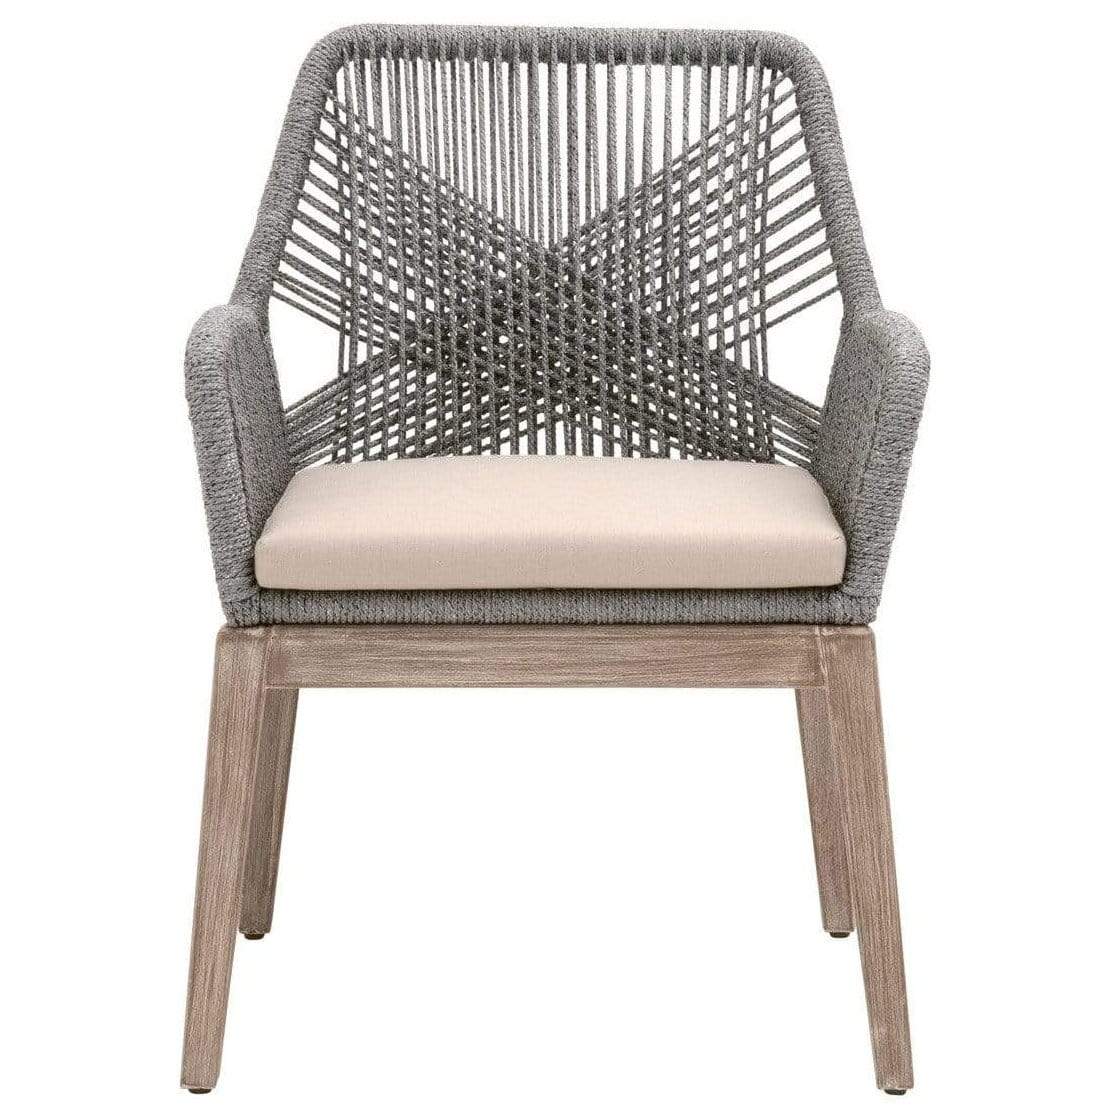 BLU Home Loom Side or Arm Chair (Set of 2) Furniture orient-express-6809KD.PLA/FLGRY/NG 00842279106706